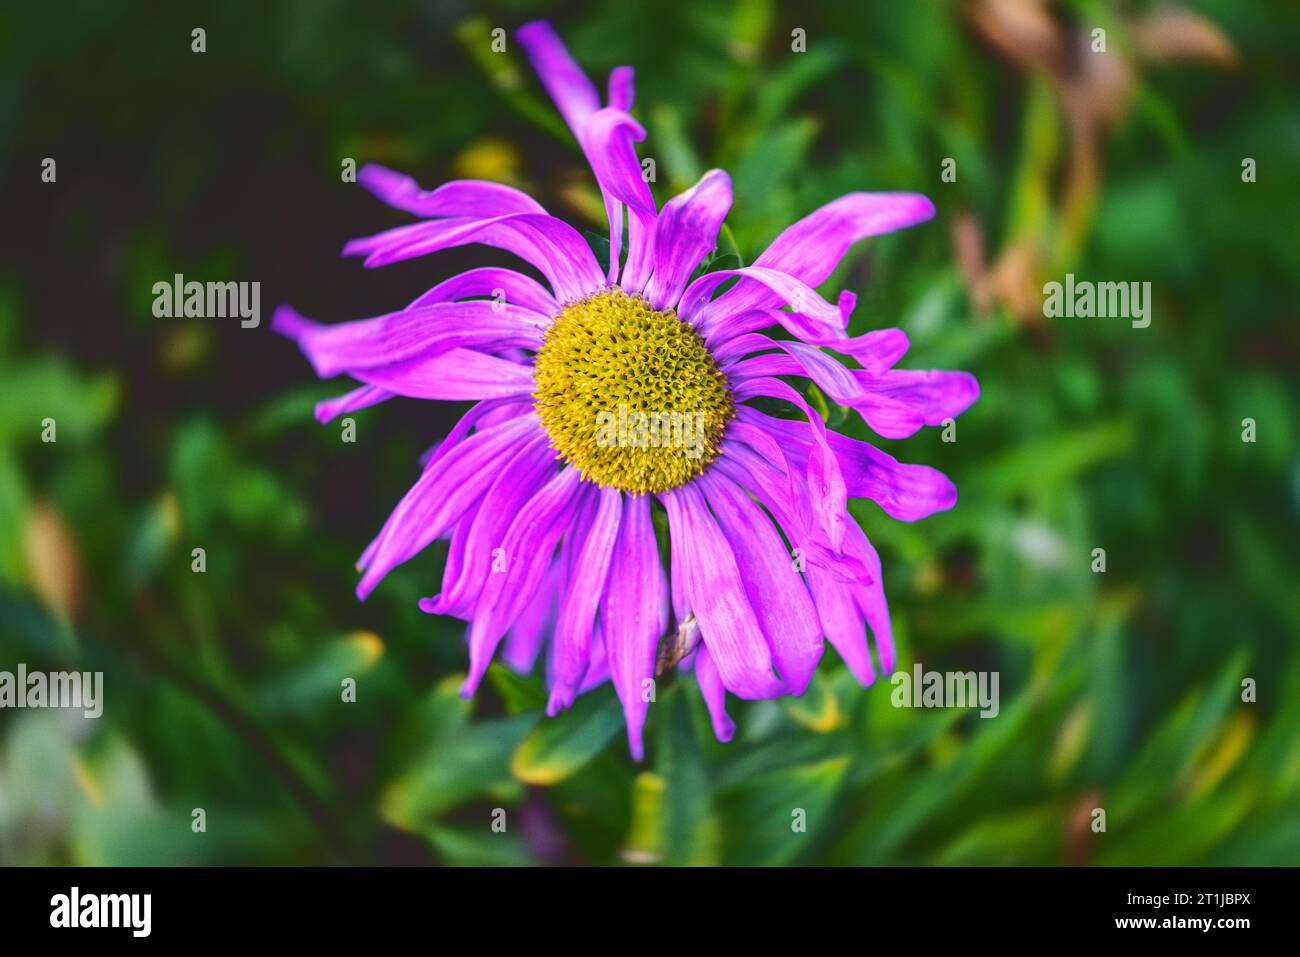 Closeup of flower of Aster alpinus in a garden in early autumn against diffused background close-up. Stock Photo